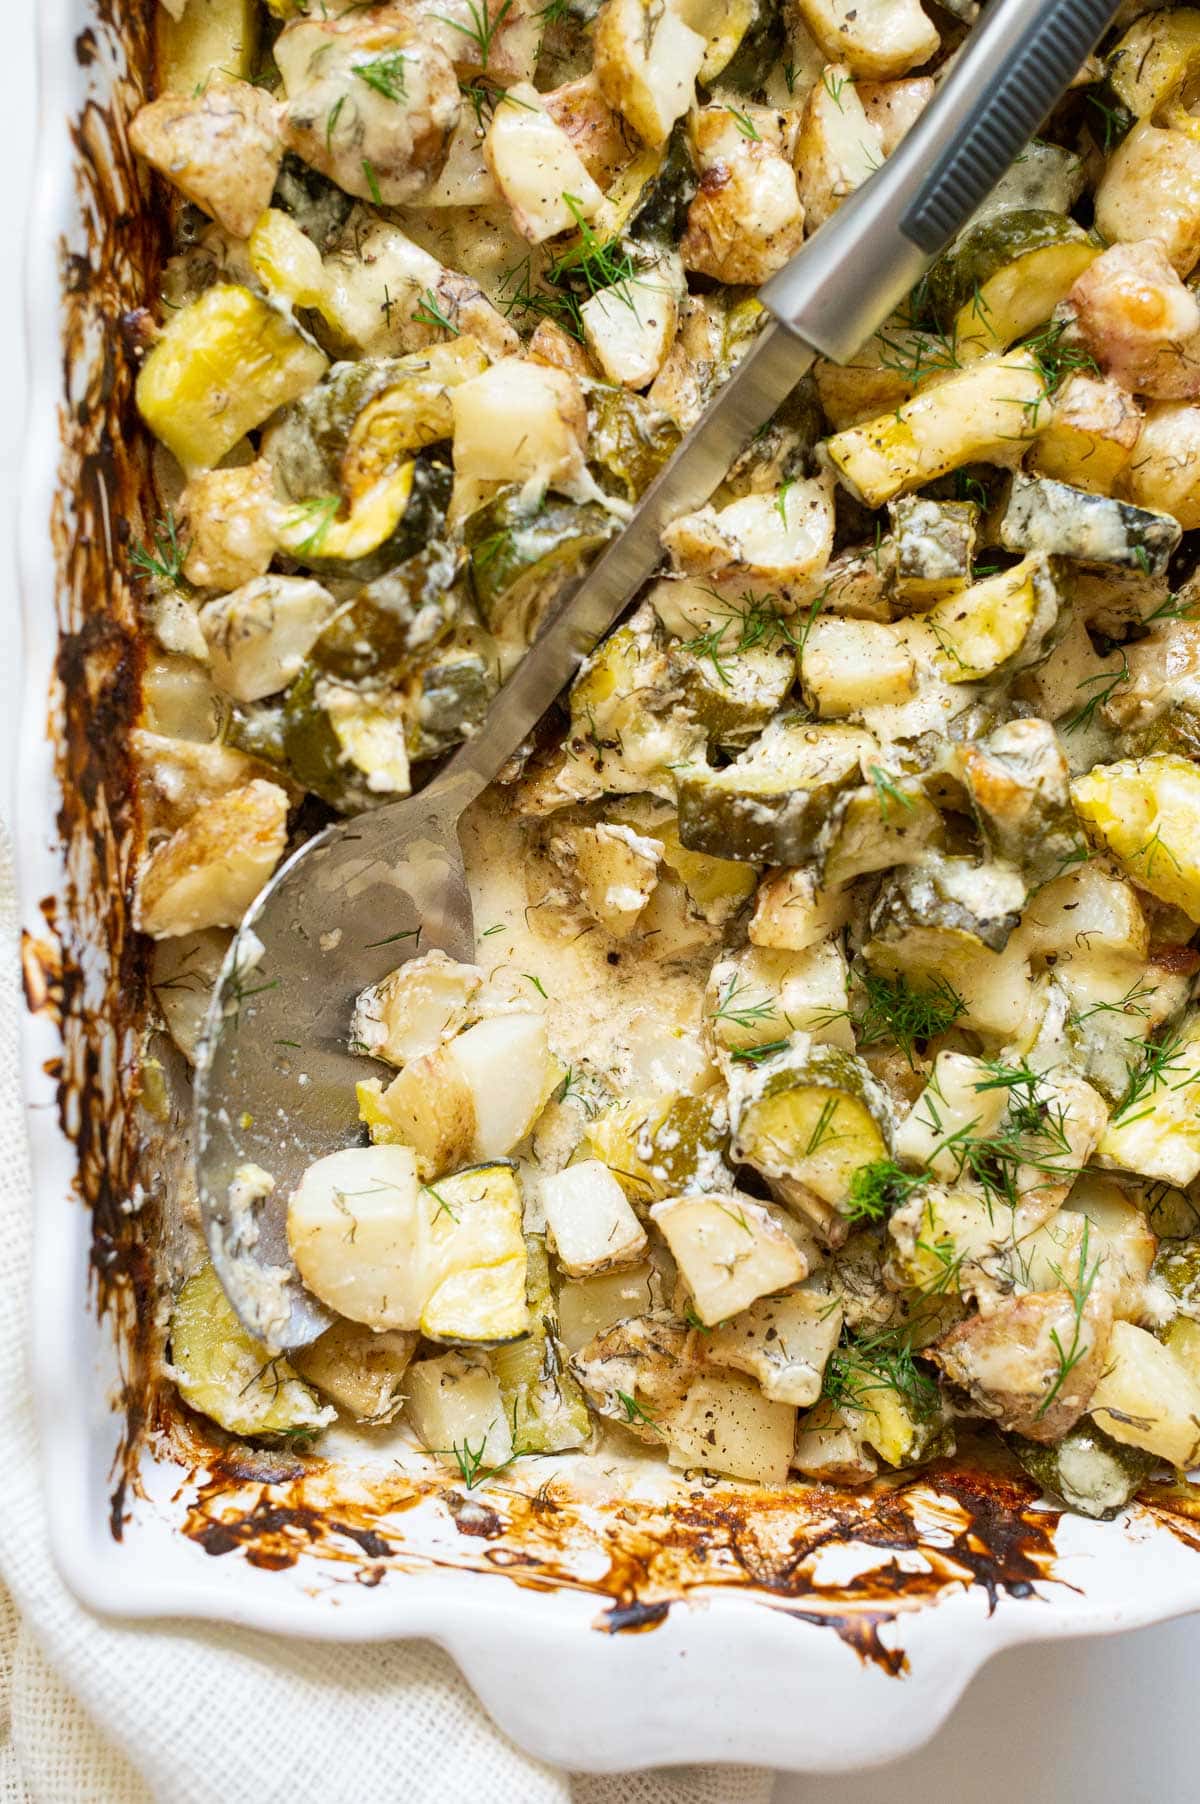 Zucchini potato casserole showing texture in a baking dish with a metal spoon.